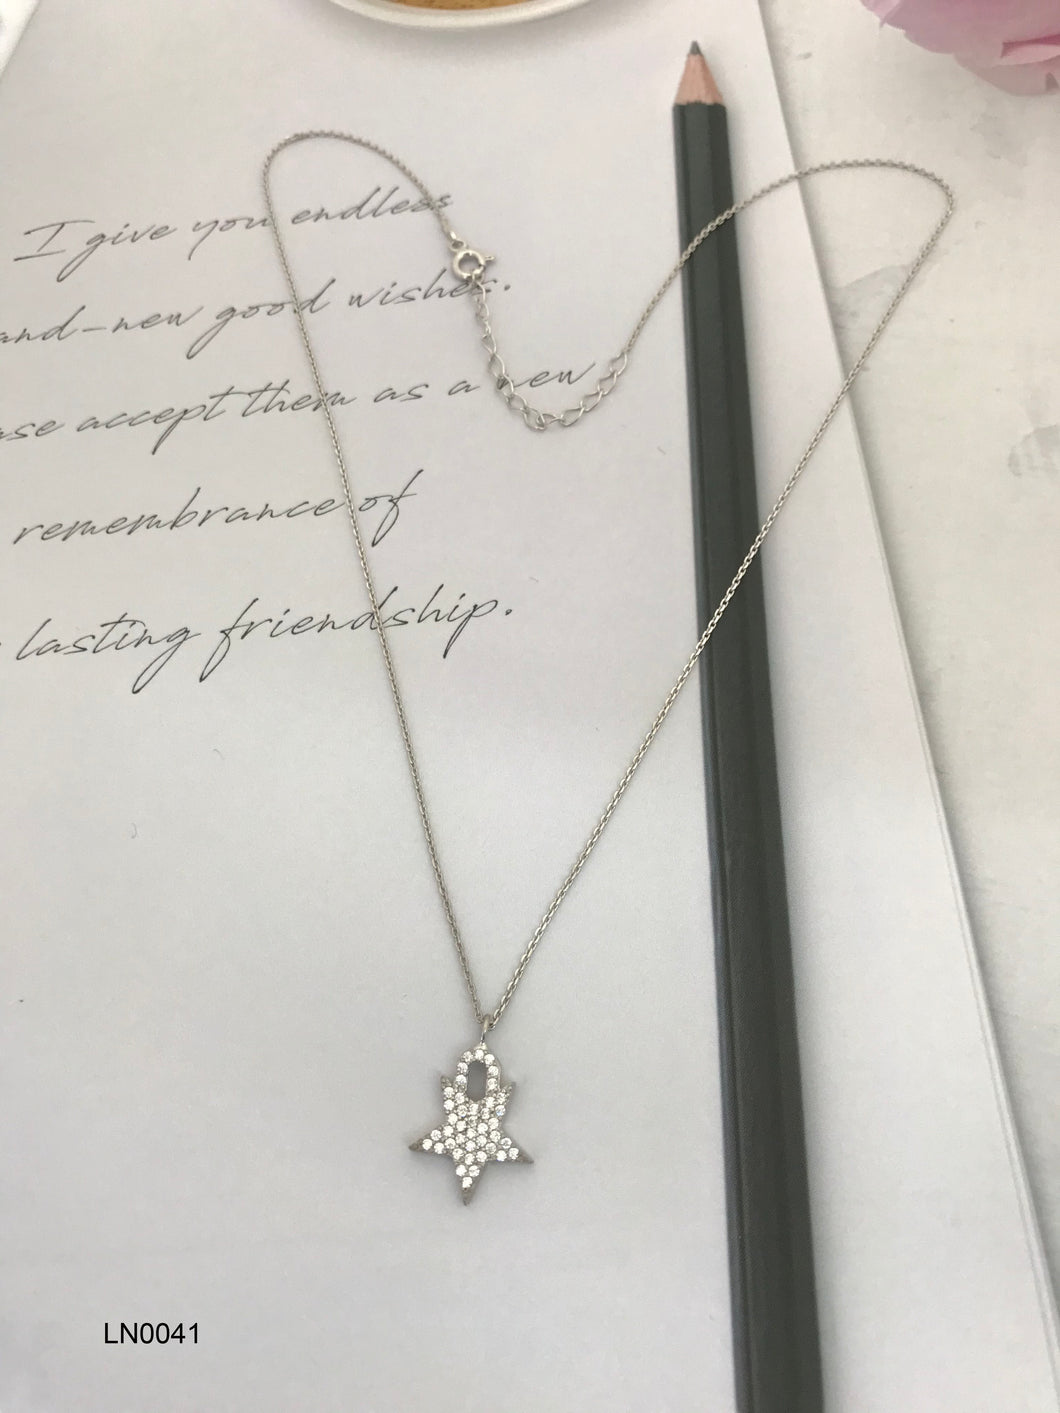 STAR NECKLACE